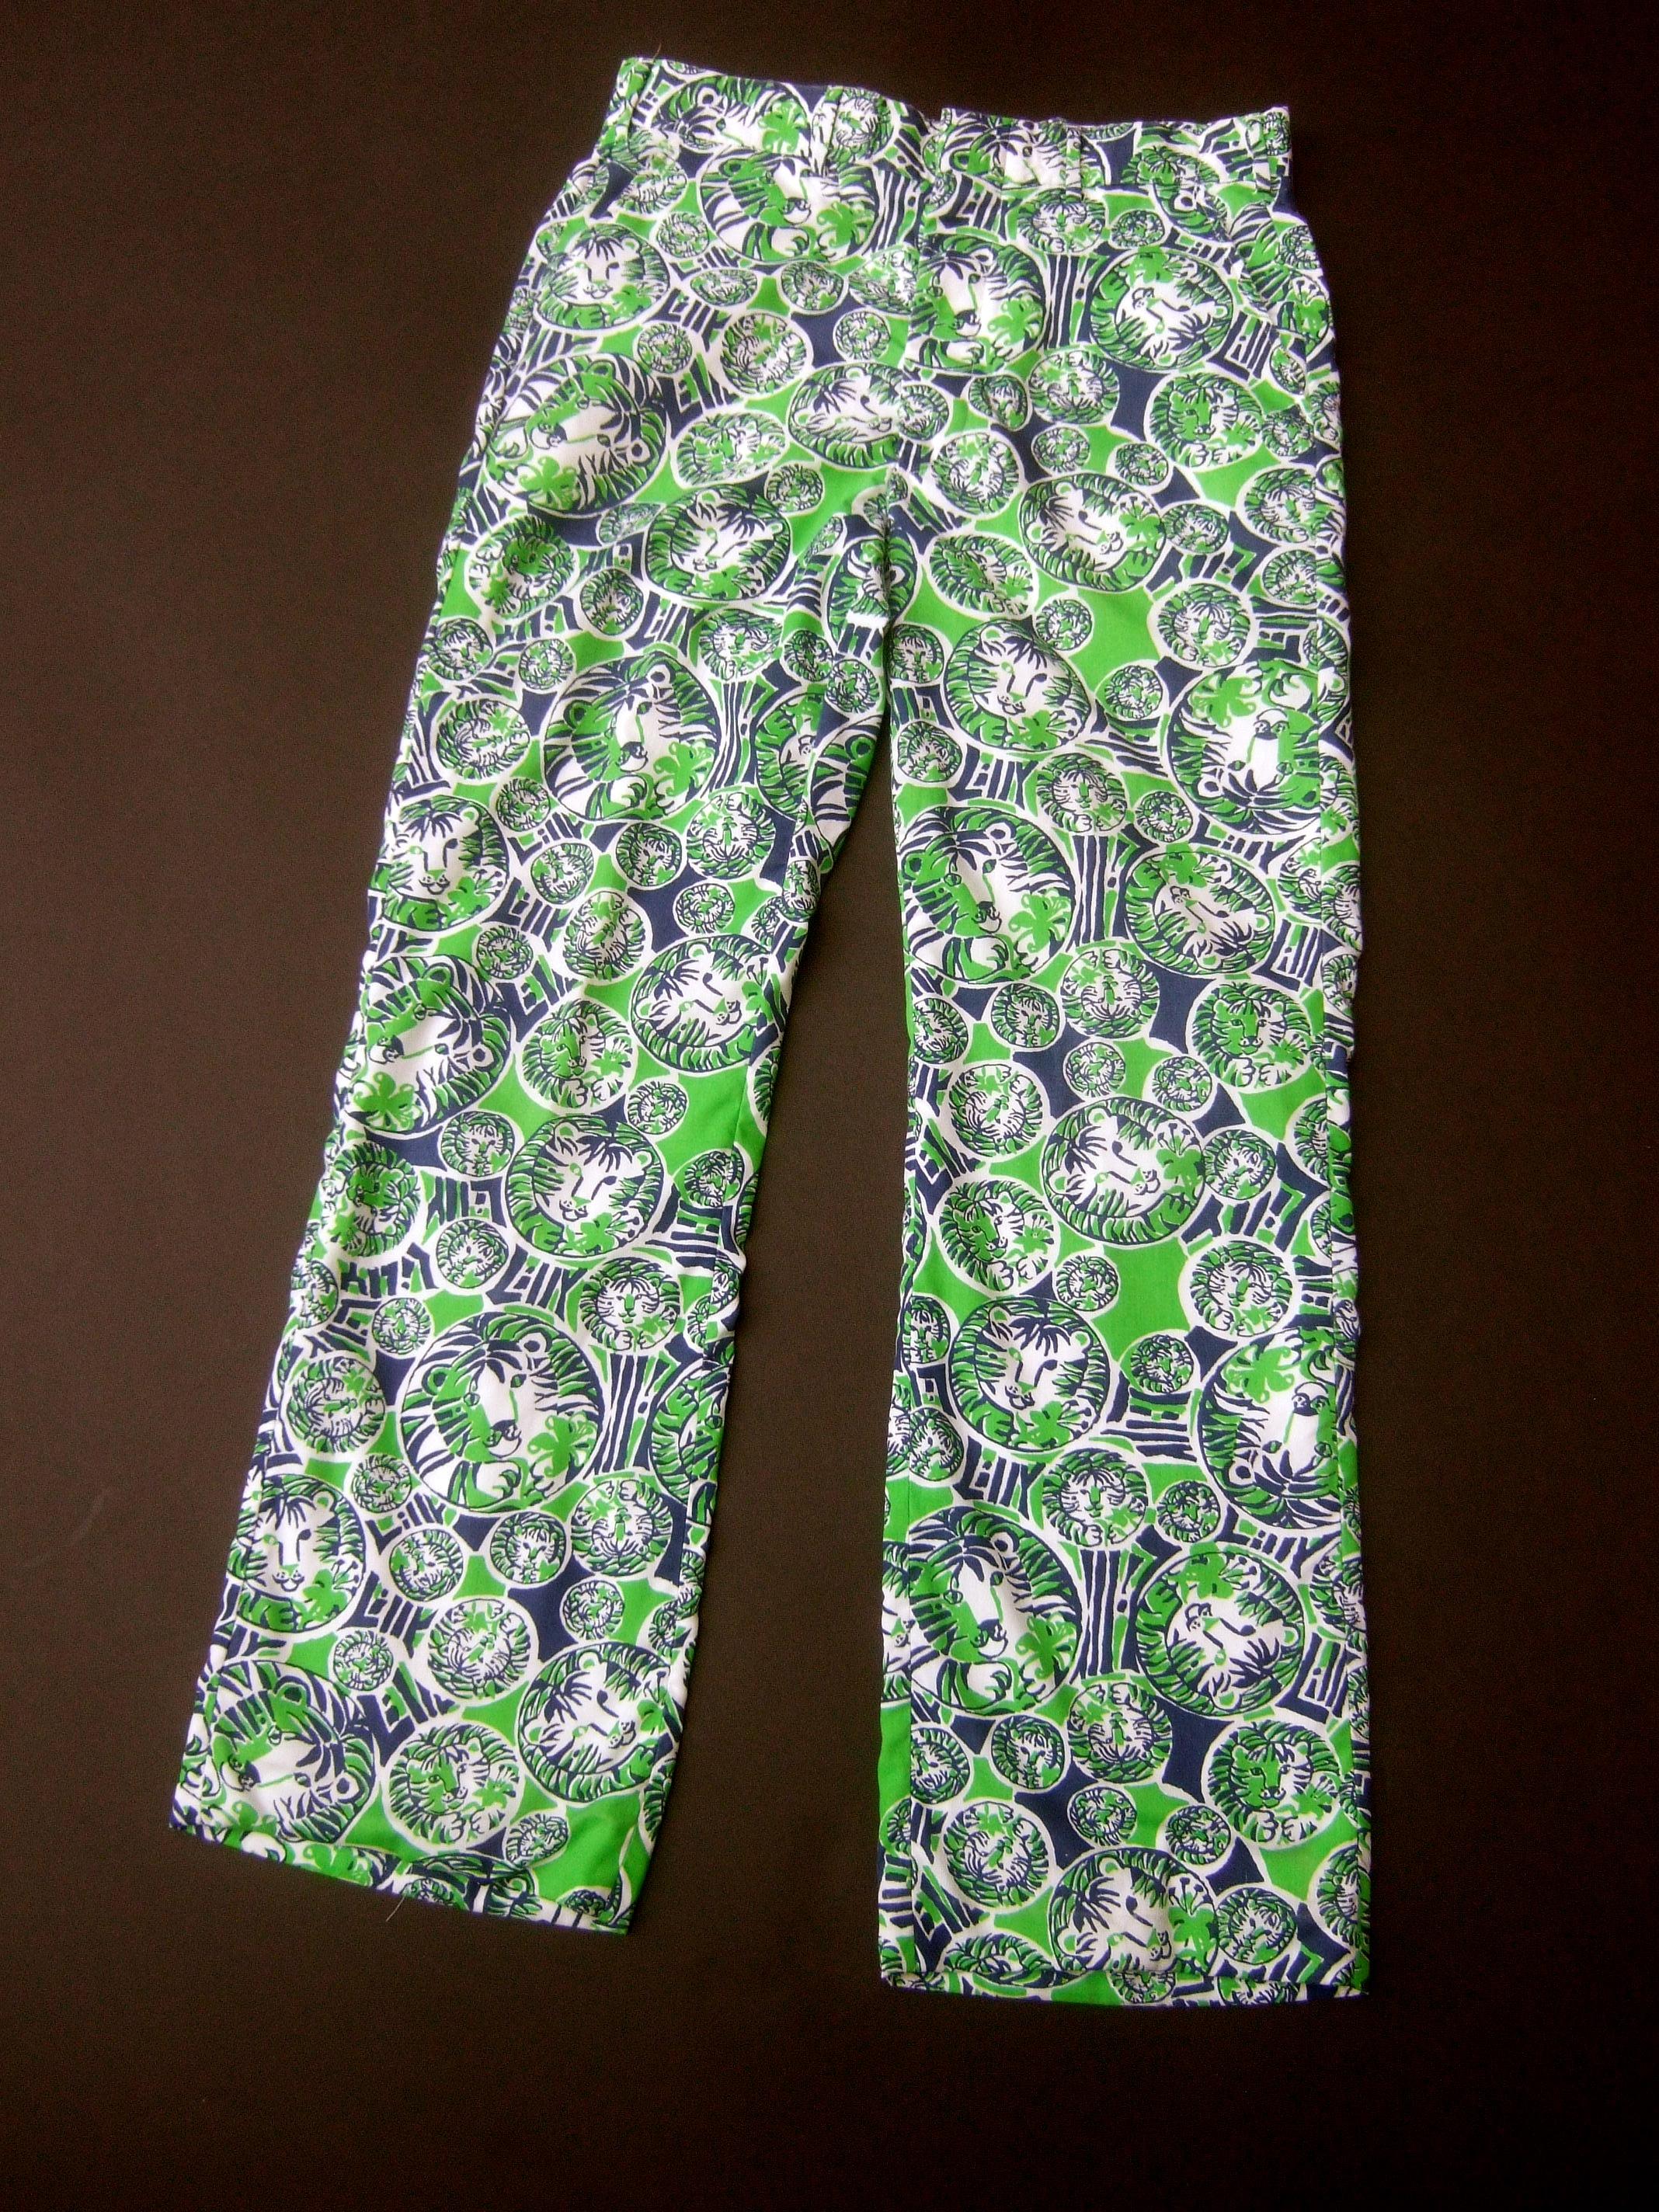 Lilly Pulitzer Men's tiger print trousers c 1970s
The preppy resort style men's trousers are designed
with Pulitzer's iconic tigers set in a vibrant jungle
print background

The bold lime green, dark blue & crisp white color
block graphics make a